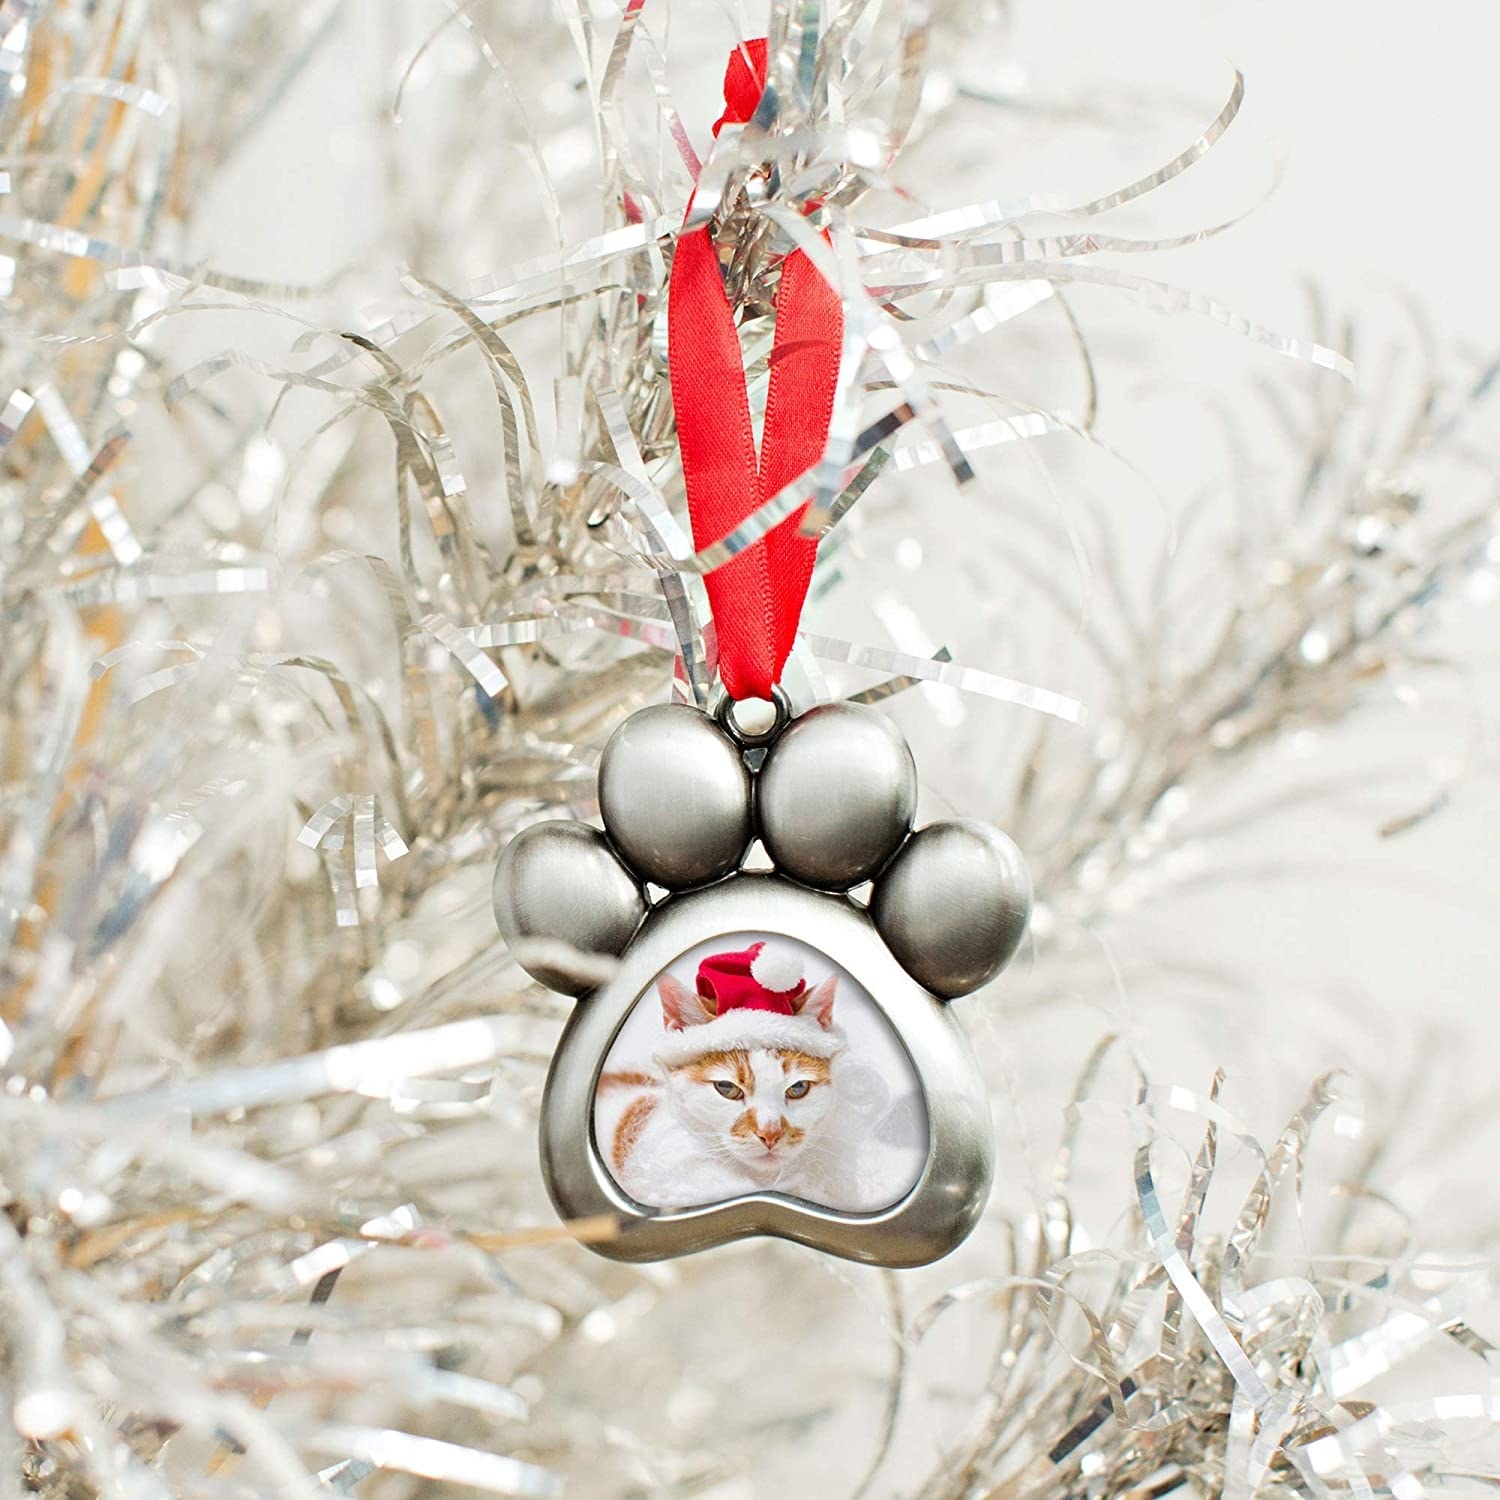 A paw-shaped hanging ornament containing a photo of a cat wearing a Santa hat